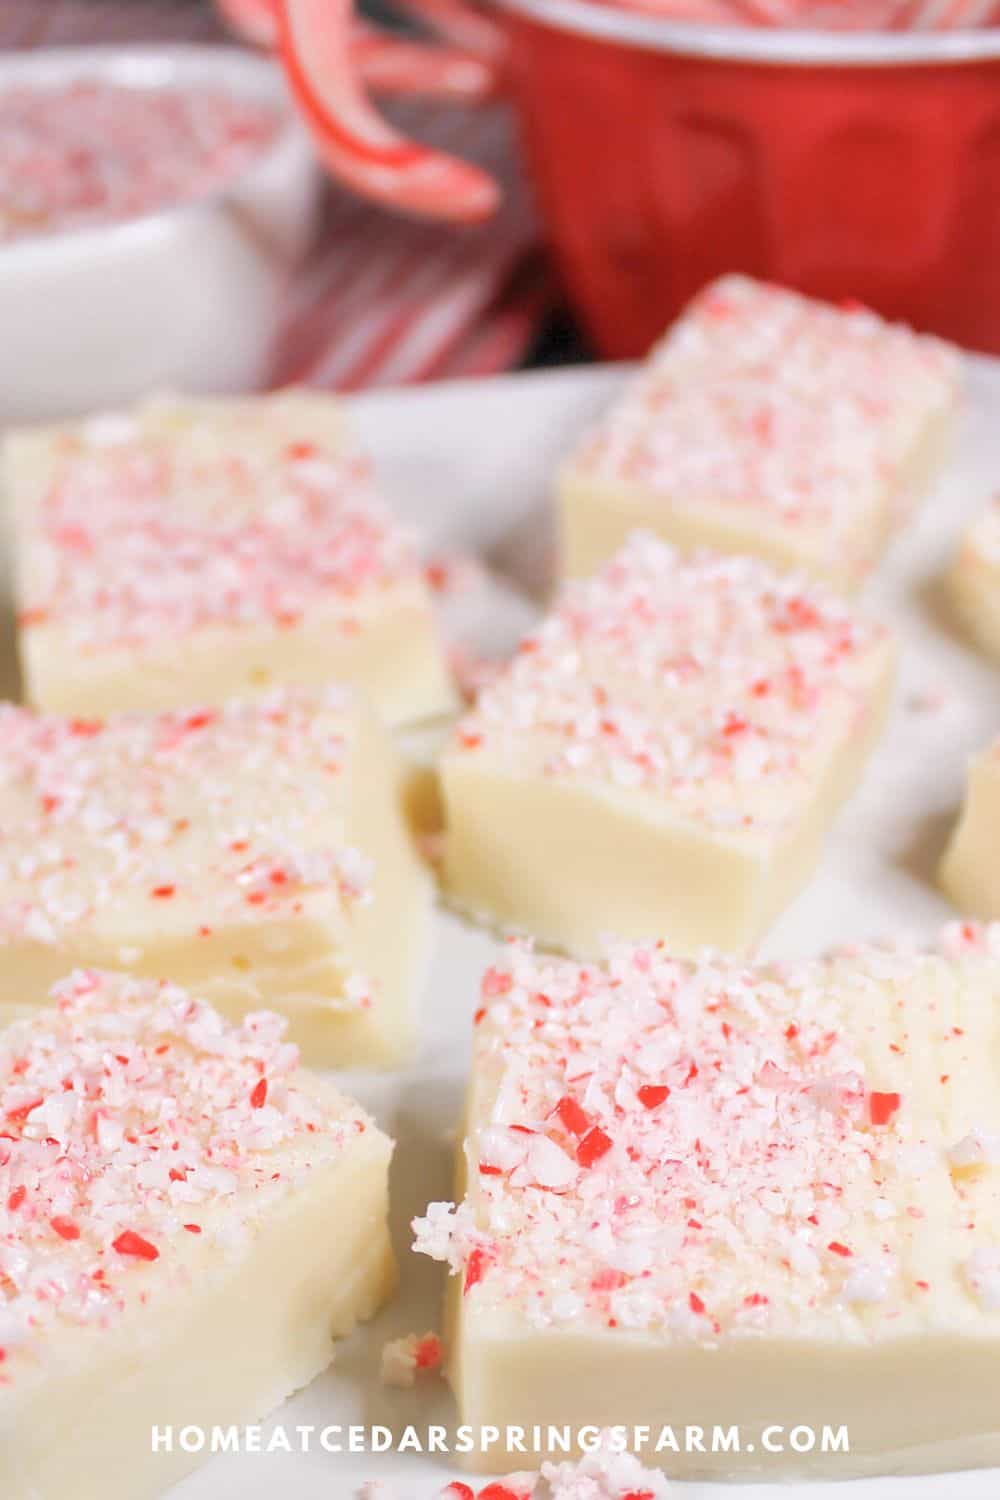 White chocolate peppermint fudge on a white plate with peppermint candies in other dishes.